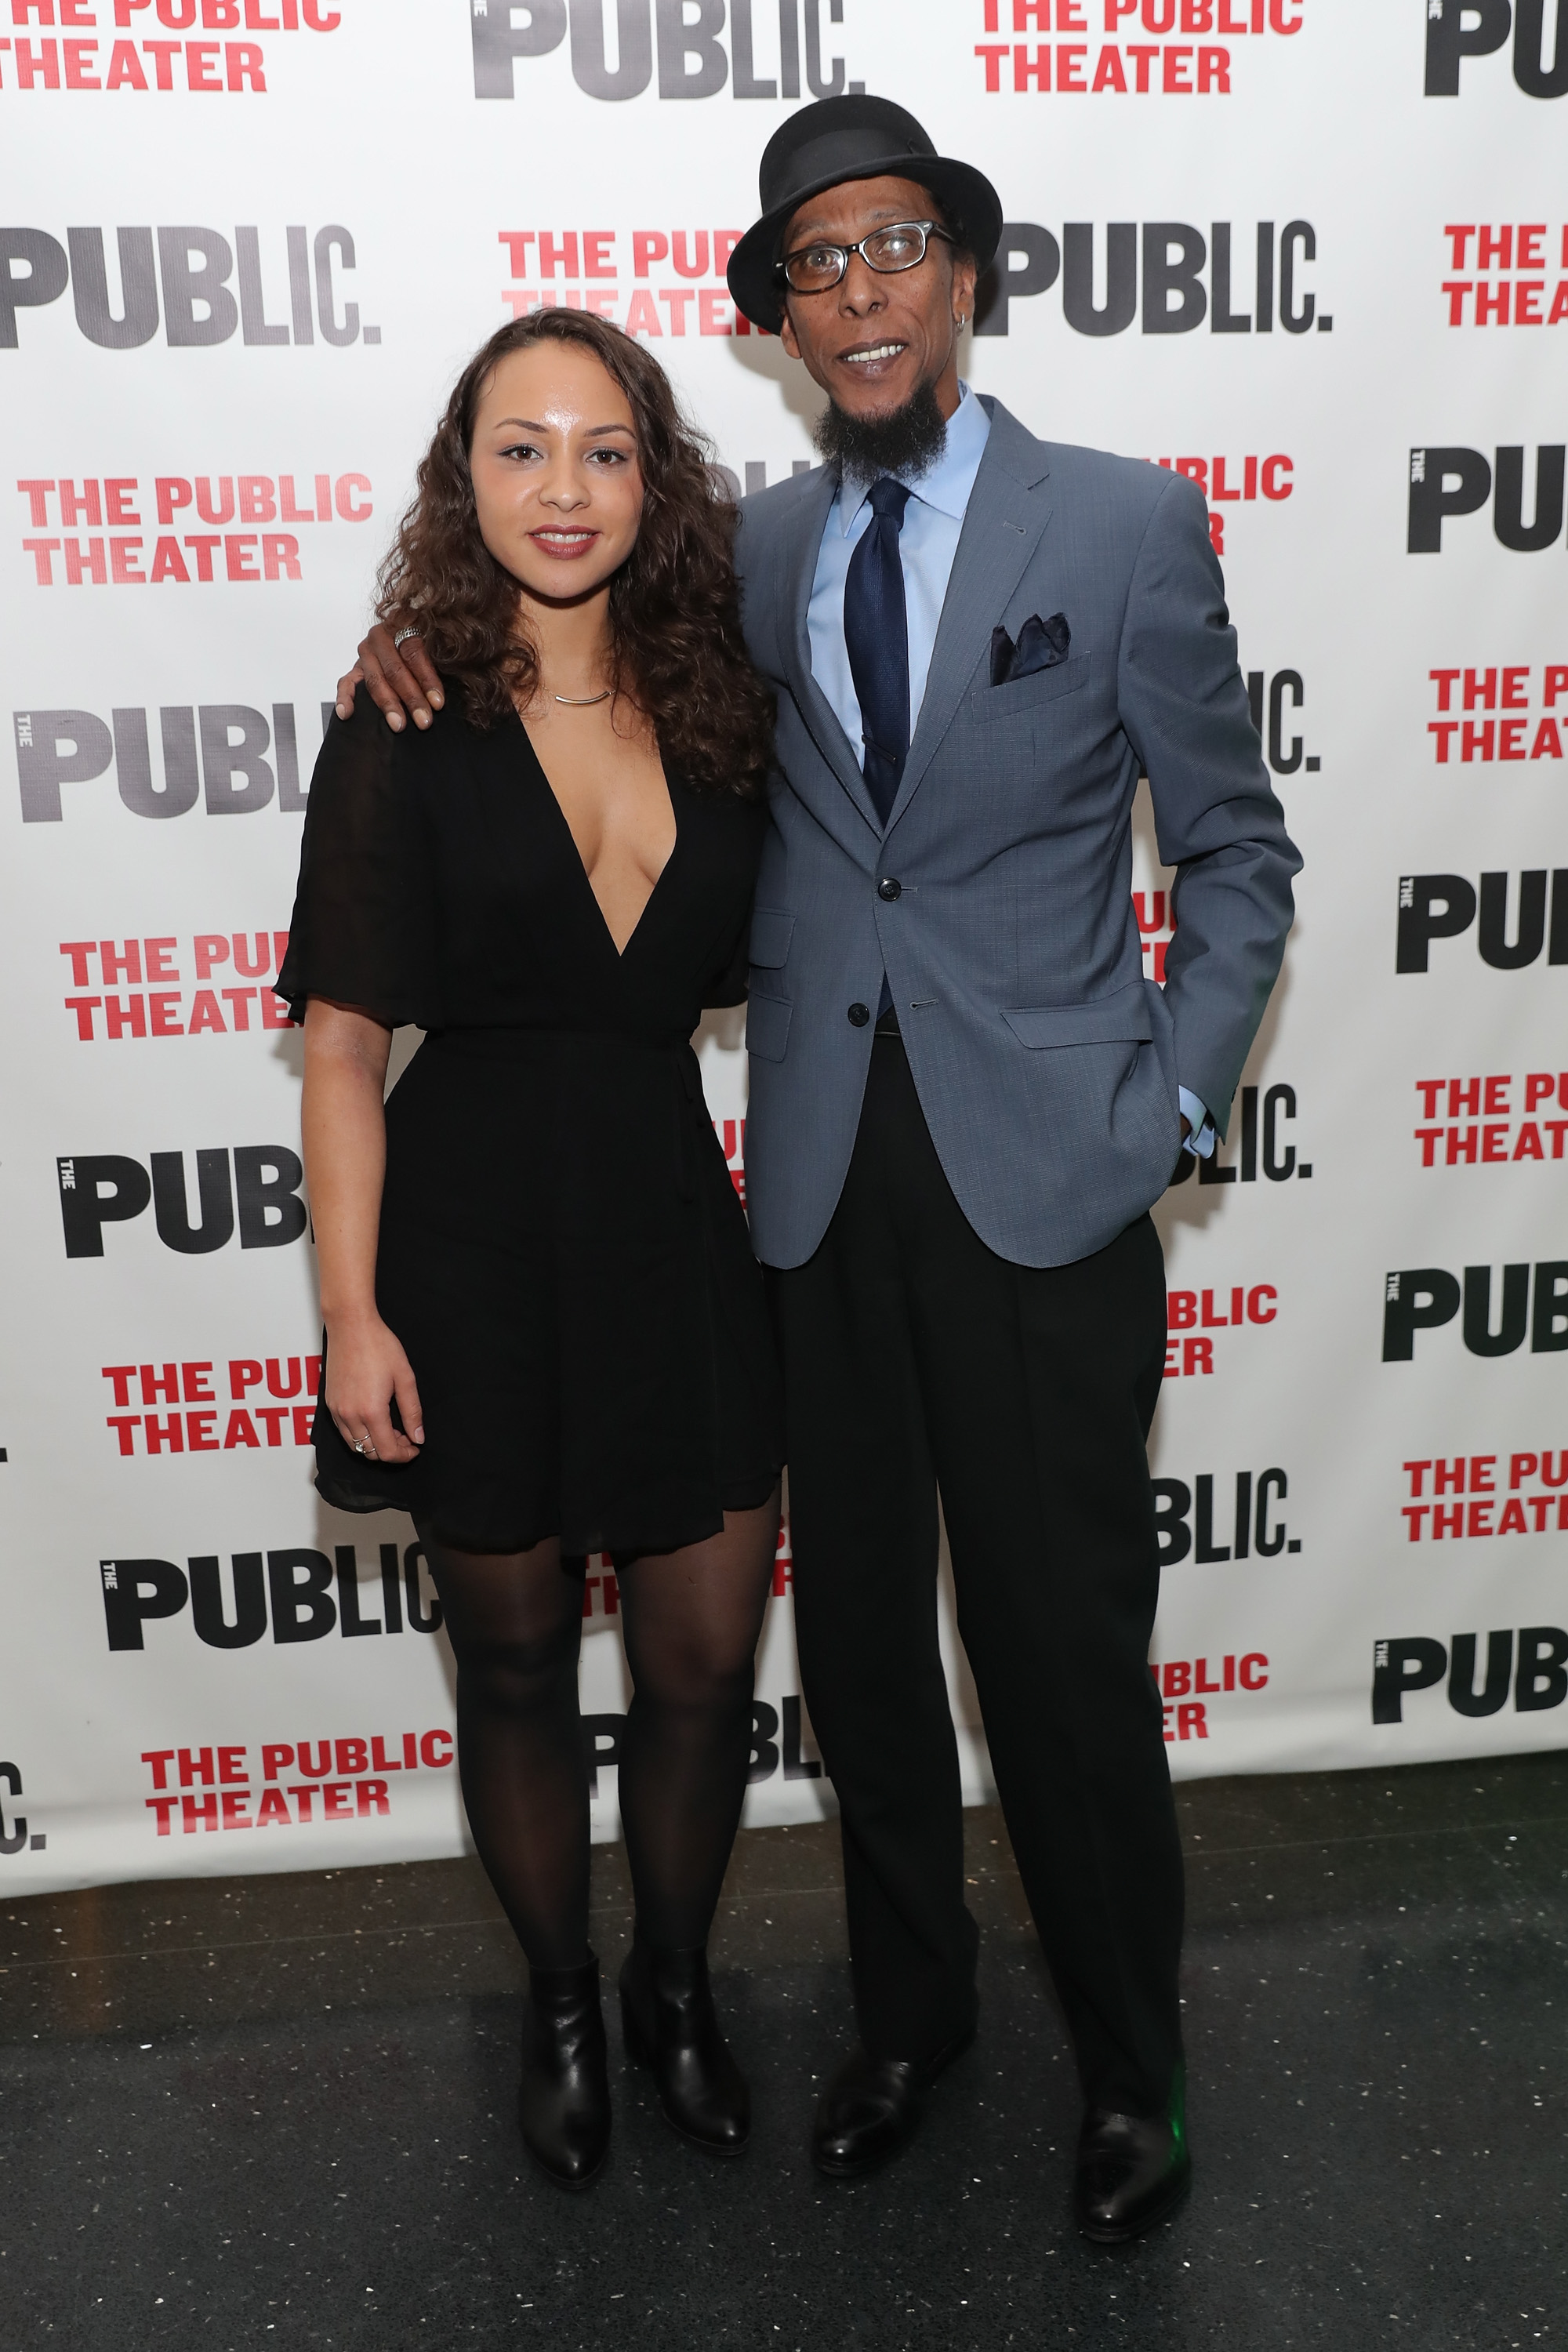 Jasmine Cephas Jones and Ron Cephas Jones attends the "Head Of Passes" opening night celebration at The Public Theater on March 28, 2016 in New York City. 